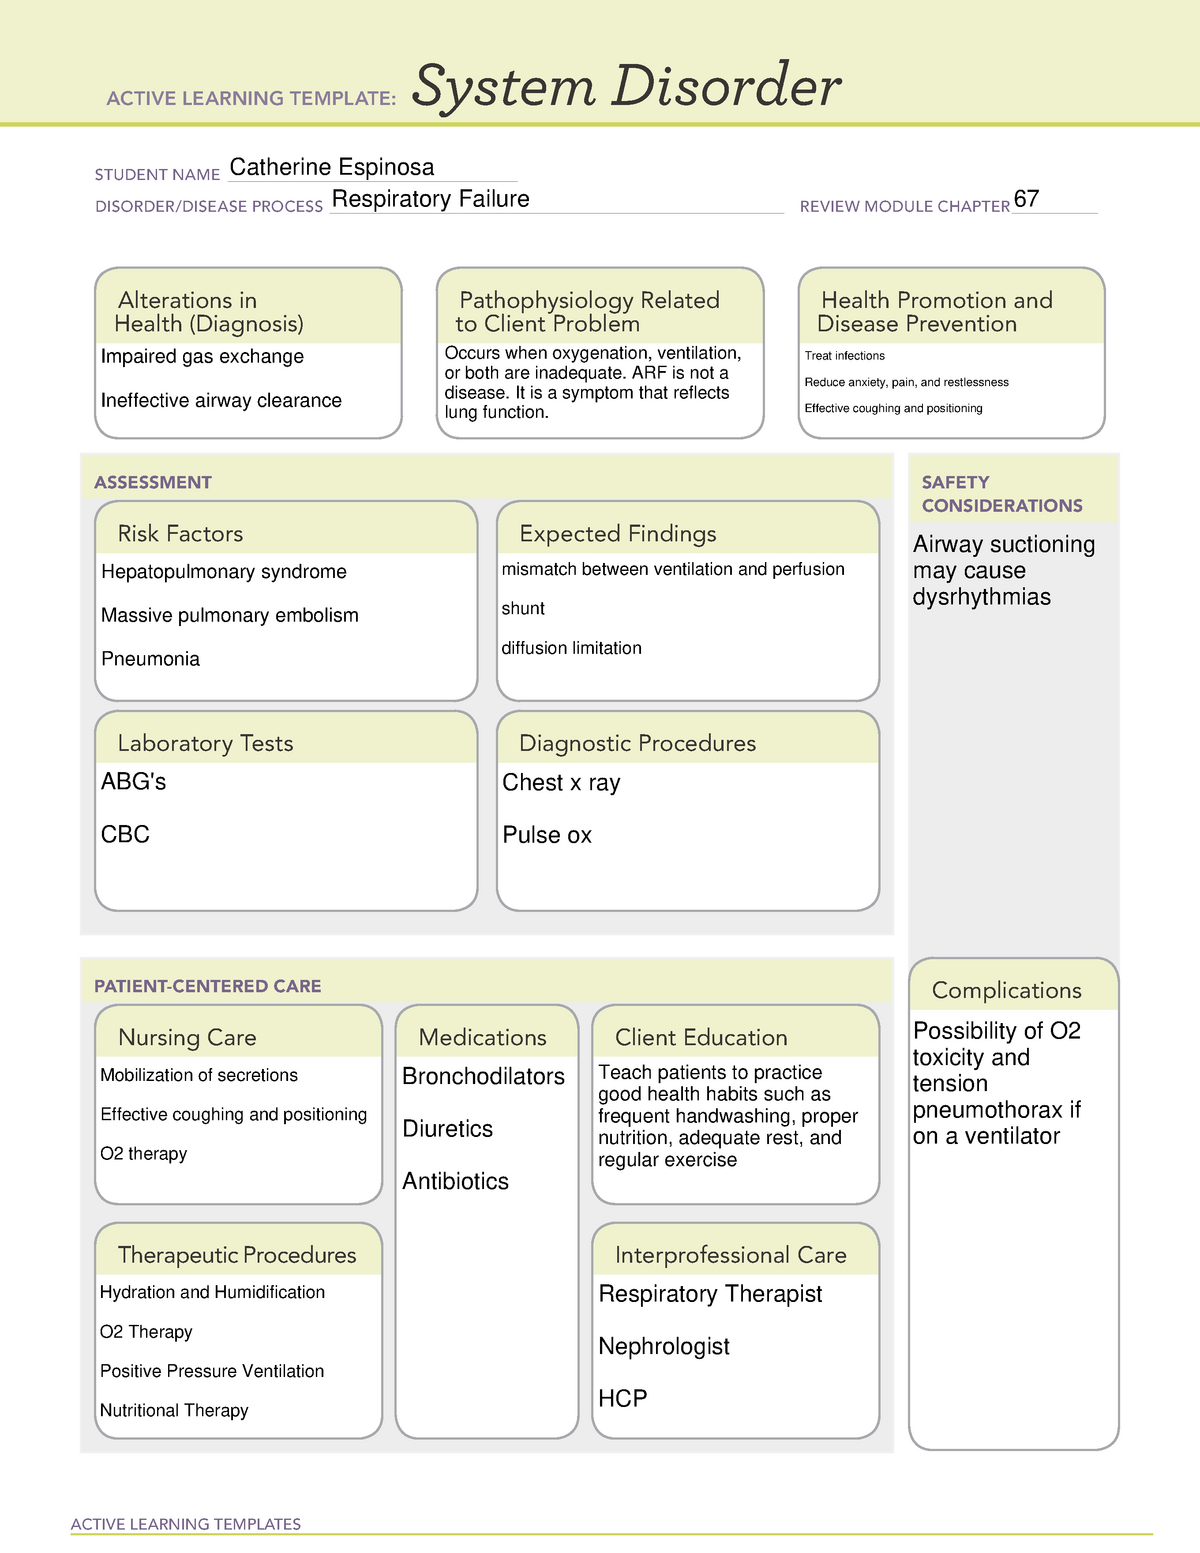 Respiratory Failure System Disorder ACTIVE LEARNING TEMPLATES System